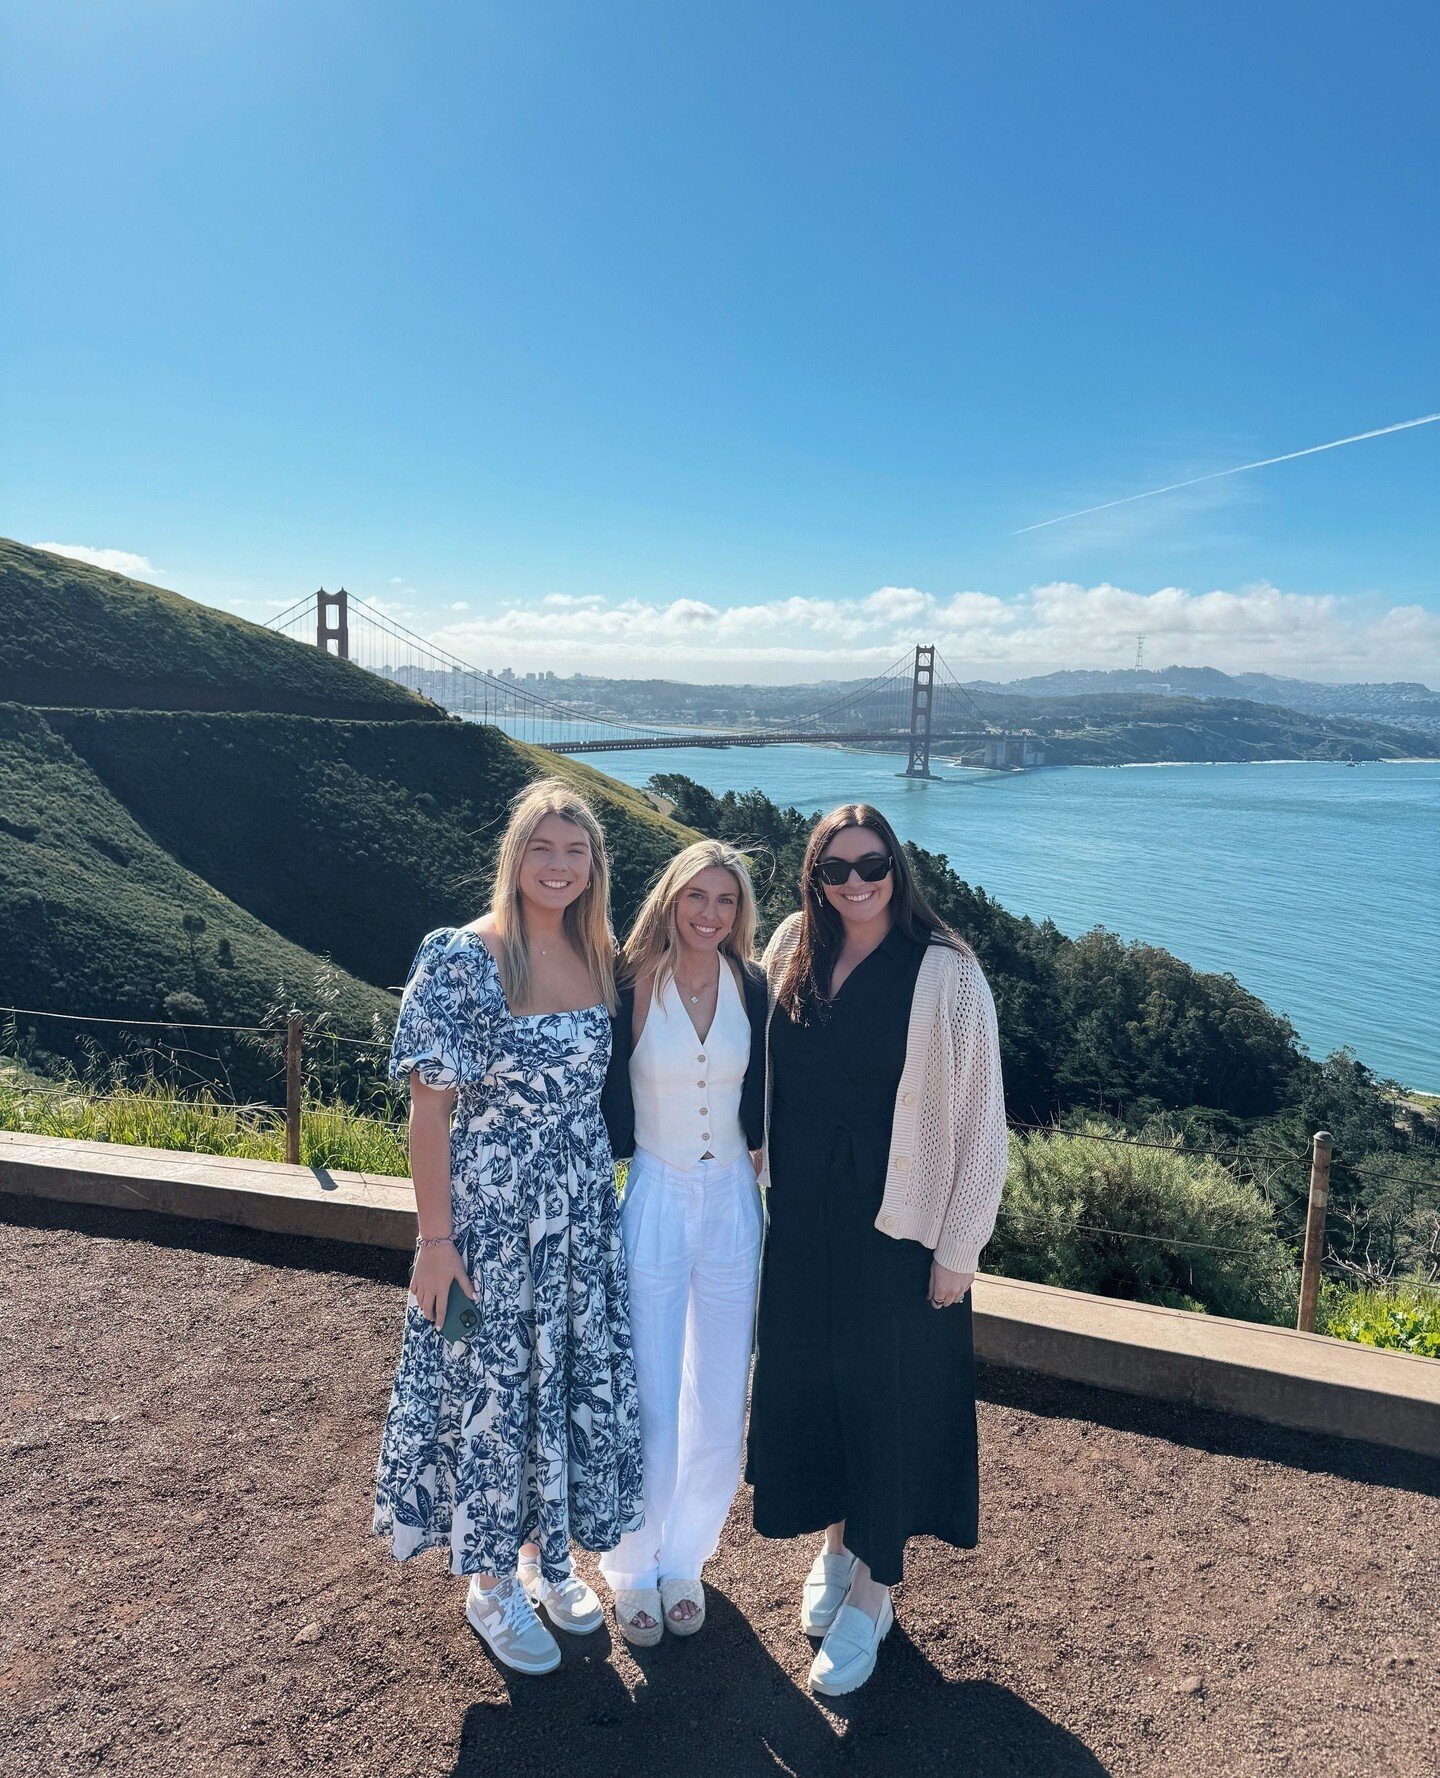 Firecrackers from coast to coast! ⁠
⁠
This week @n_preston &amp; @erinetullyy took a cross-country trip to visit clients (and @hannahstheworst) in San Francisco and Napa/Sonoma County, including @themarkersf, @duckhornwine, @thelodgesonoma and more. 